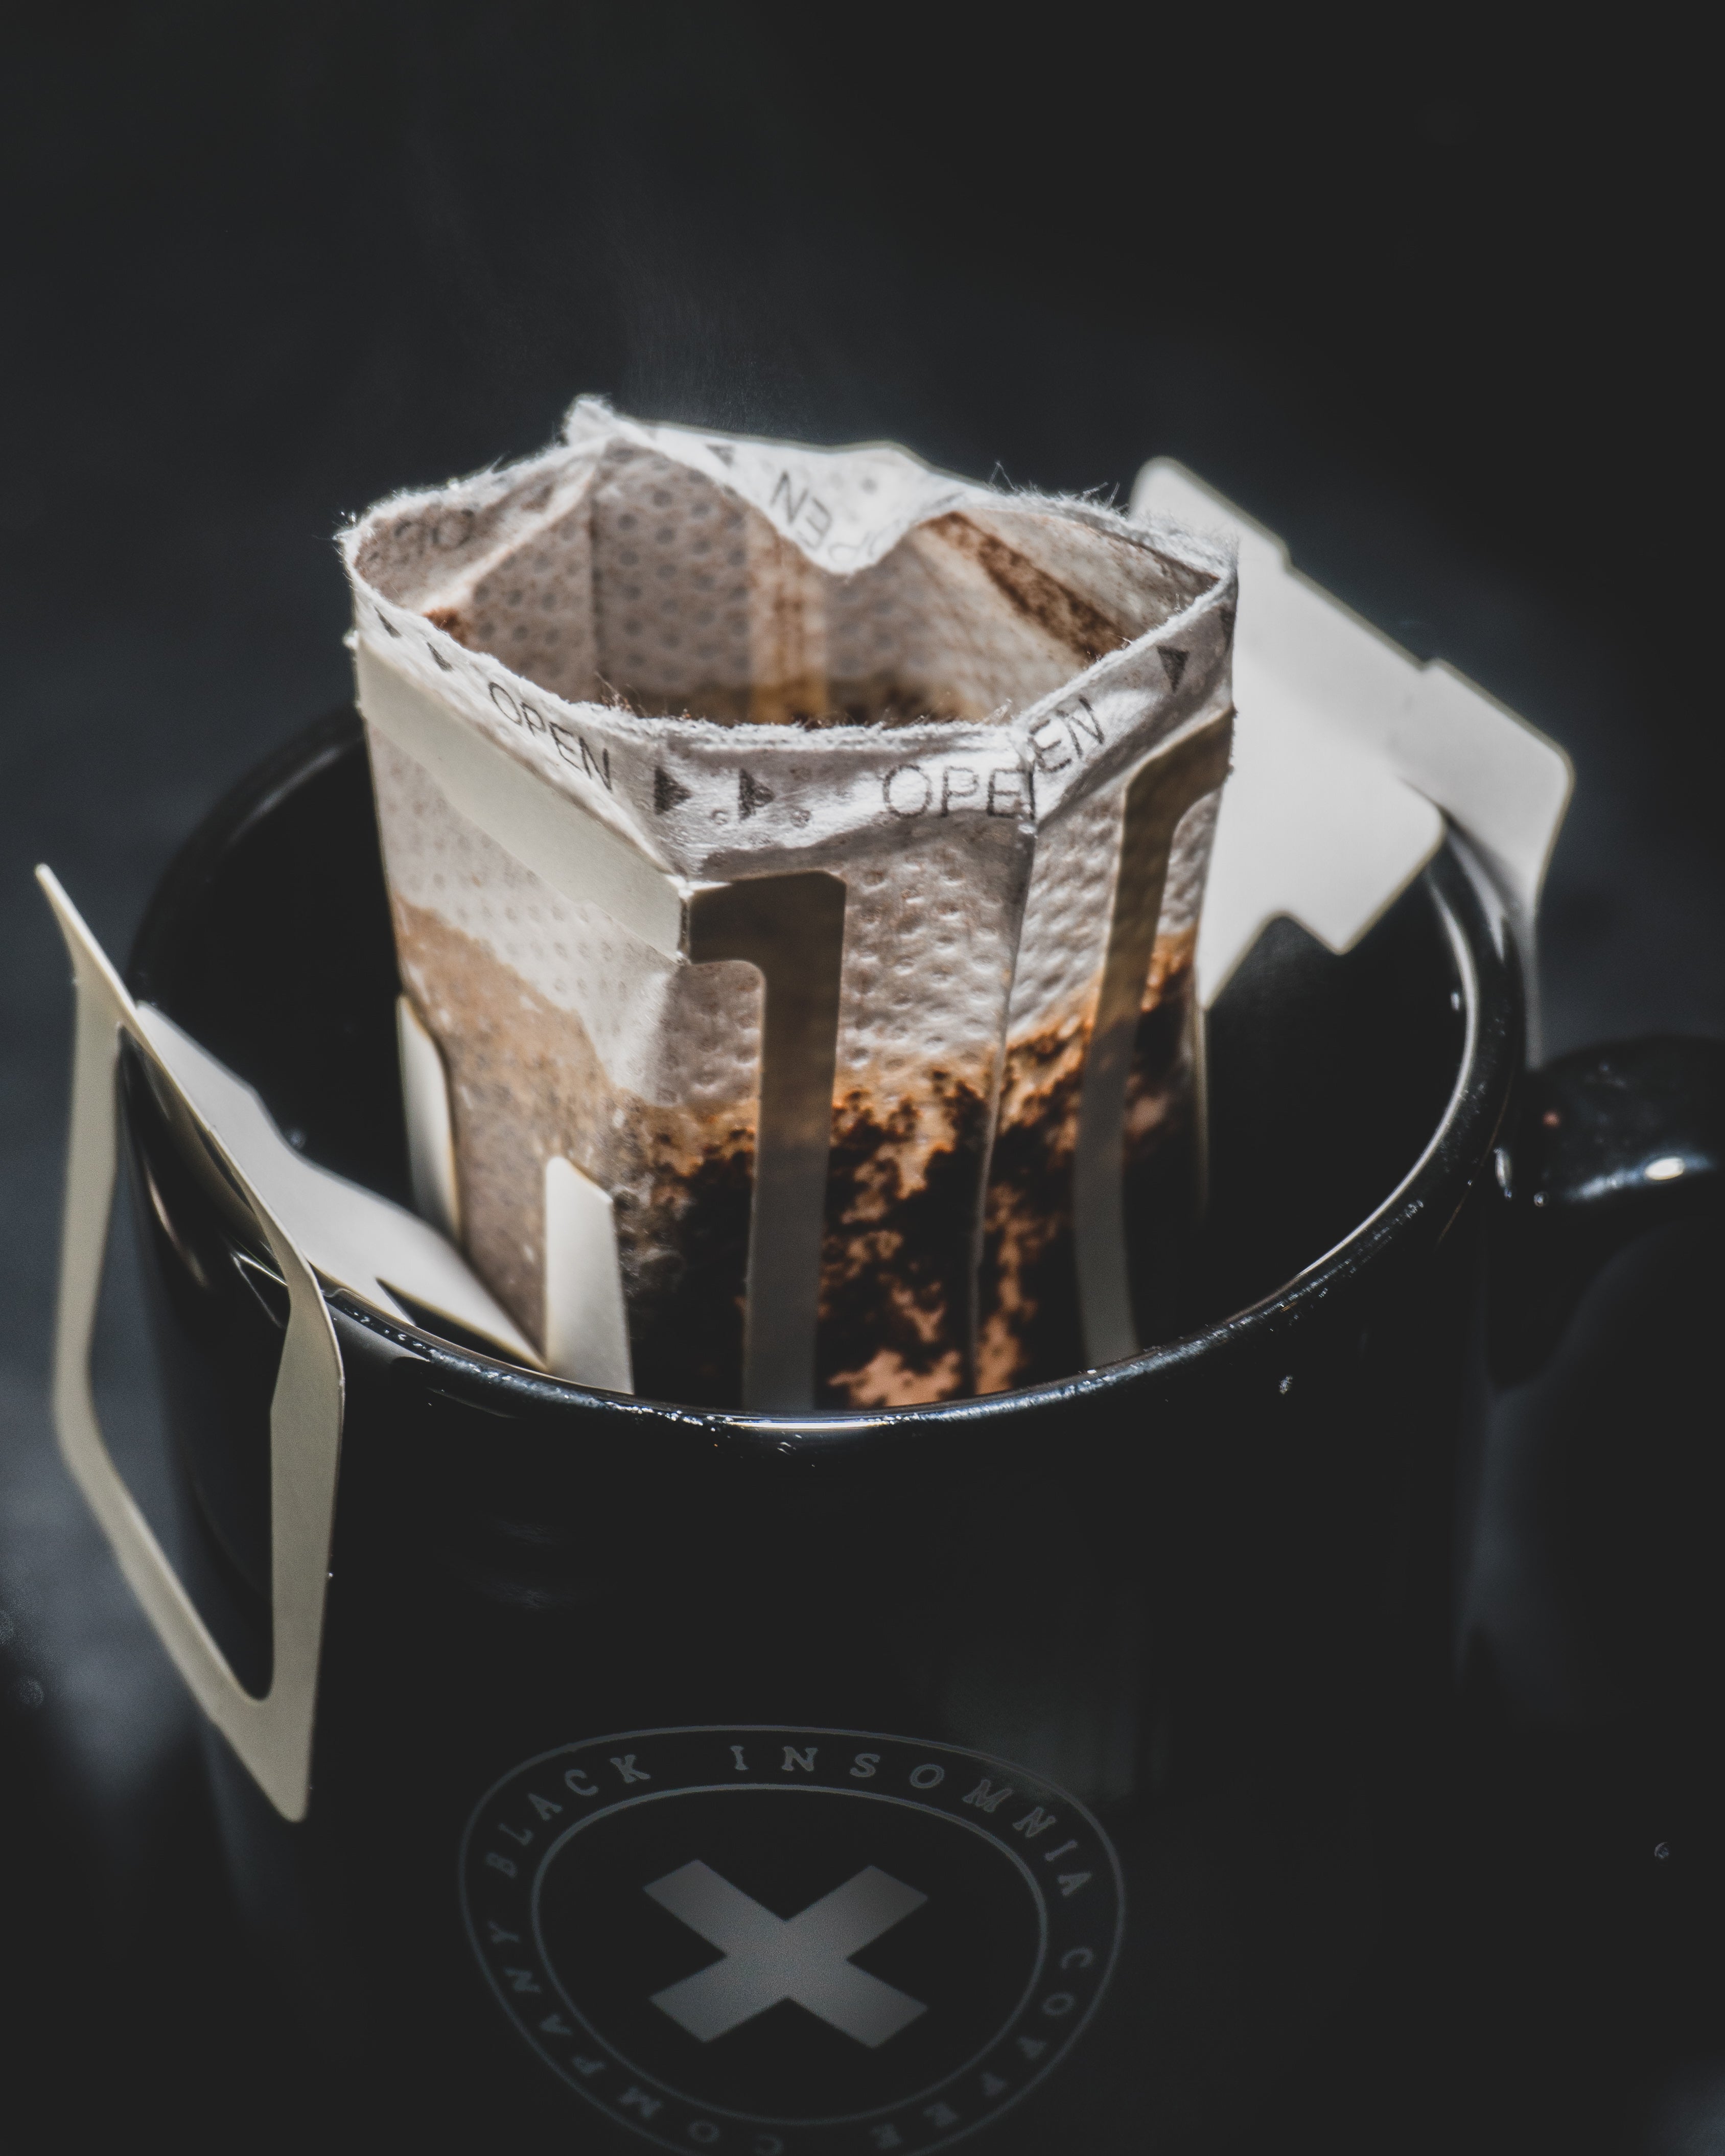 Spice Up Your Coffee With These Things – Black Insomnia Coffee